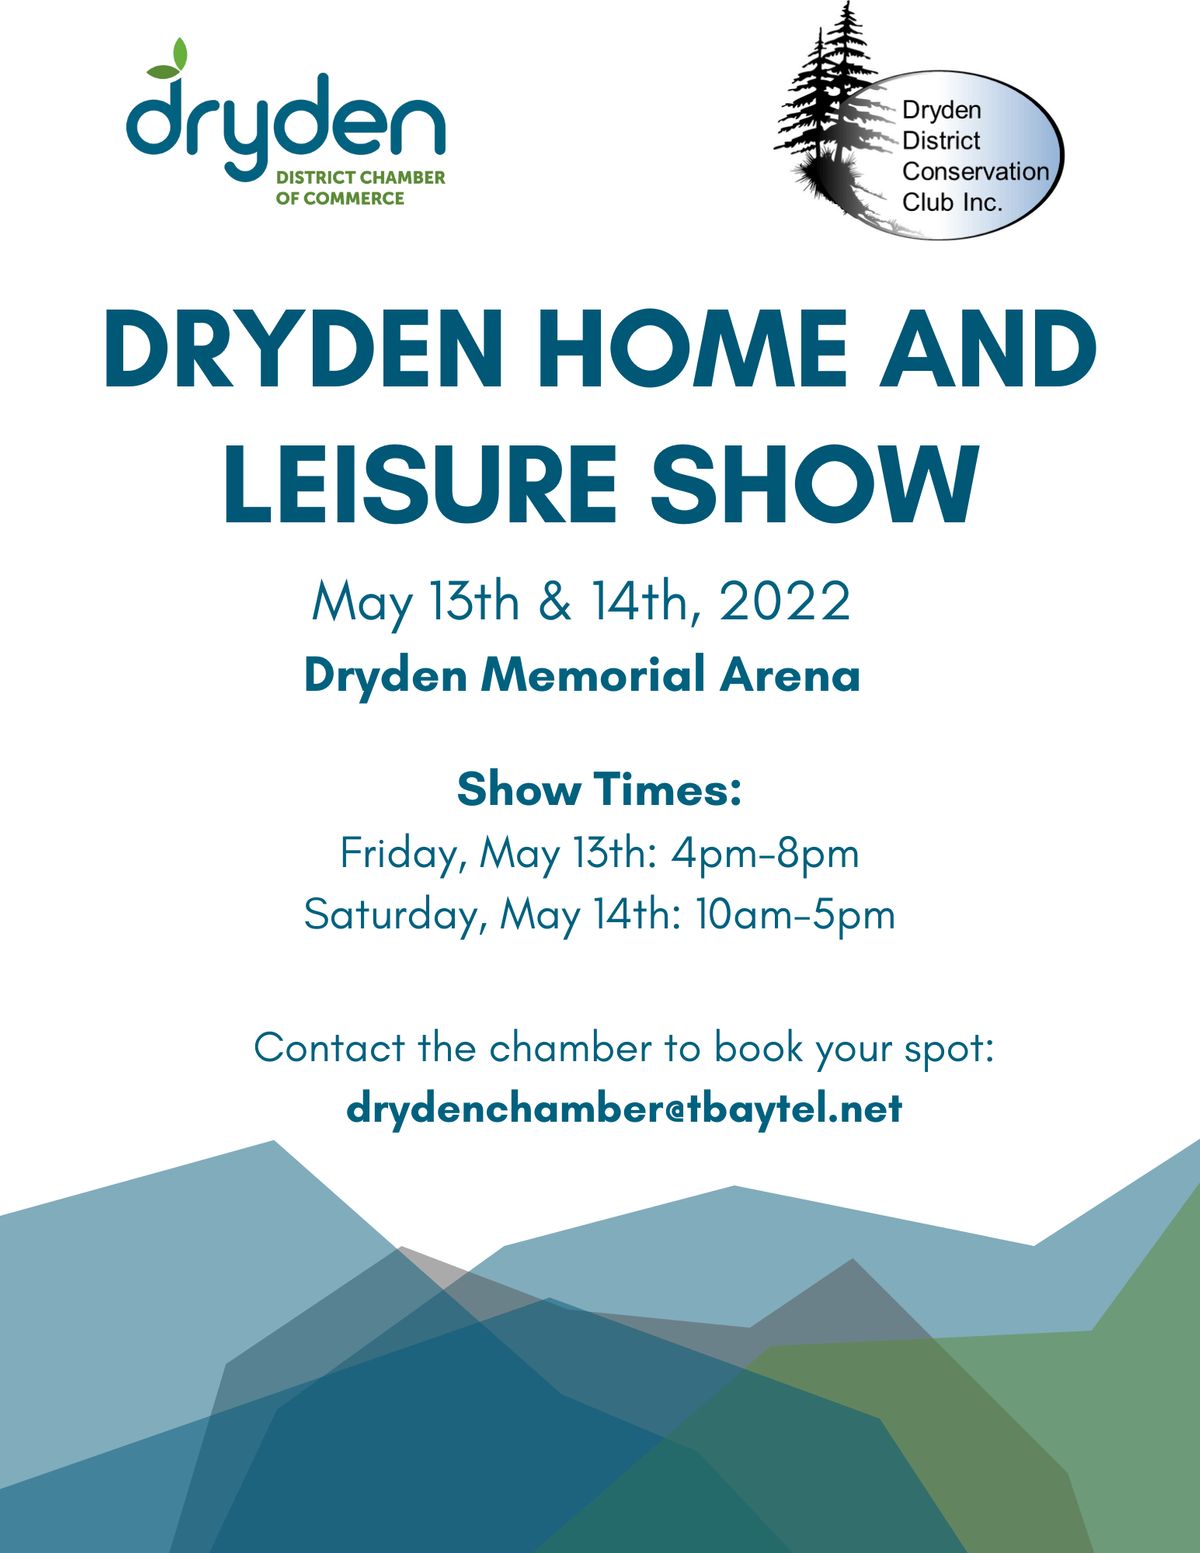 dryden home and leisure show 2022 may 13 and 14 at the dryden memorial arena